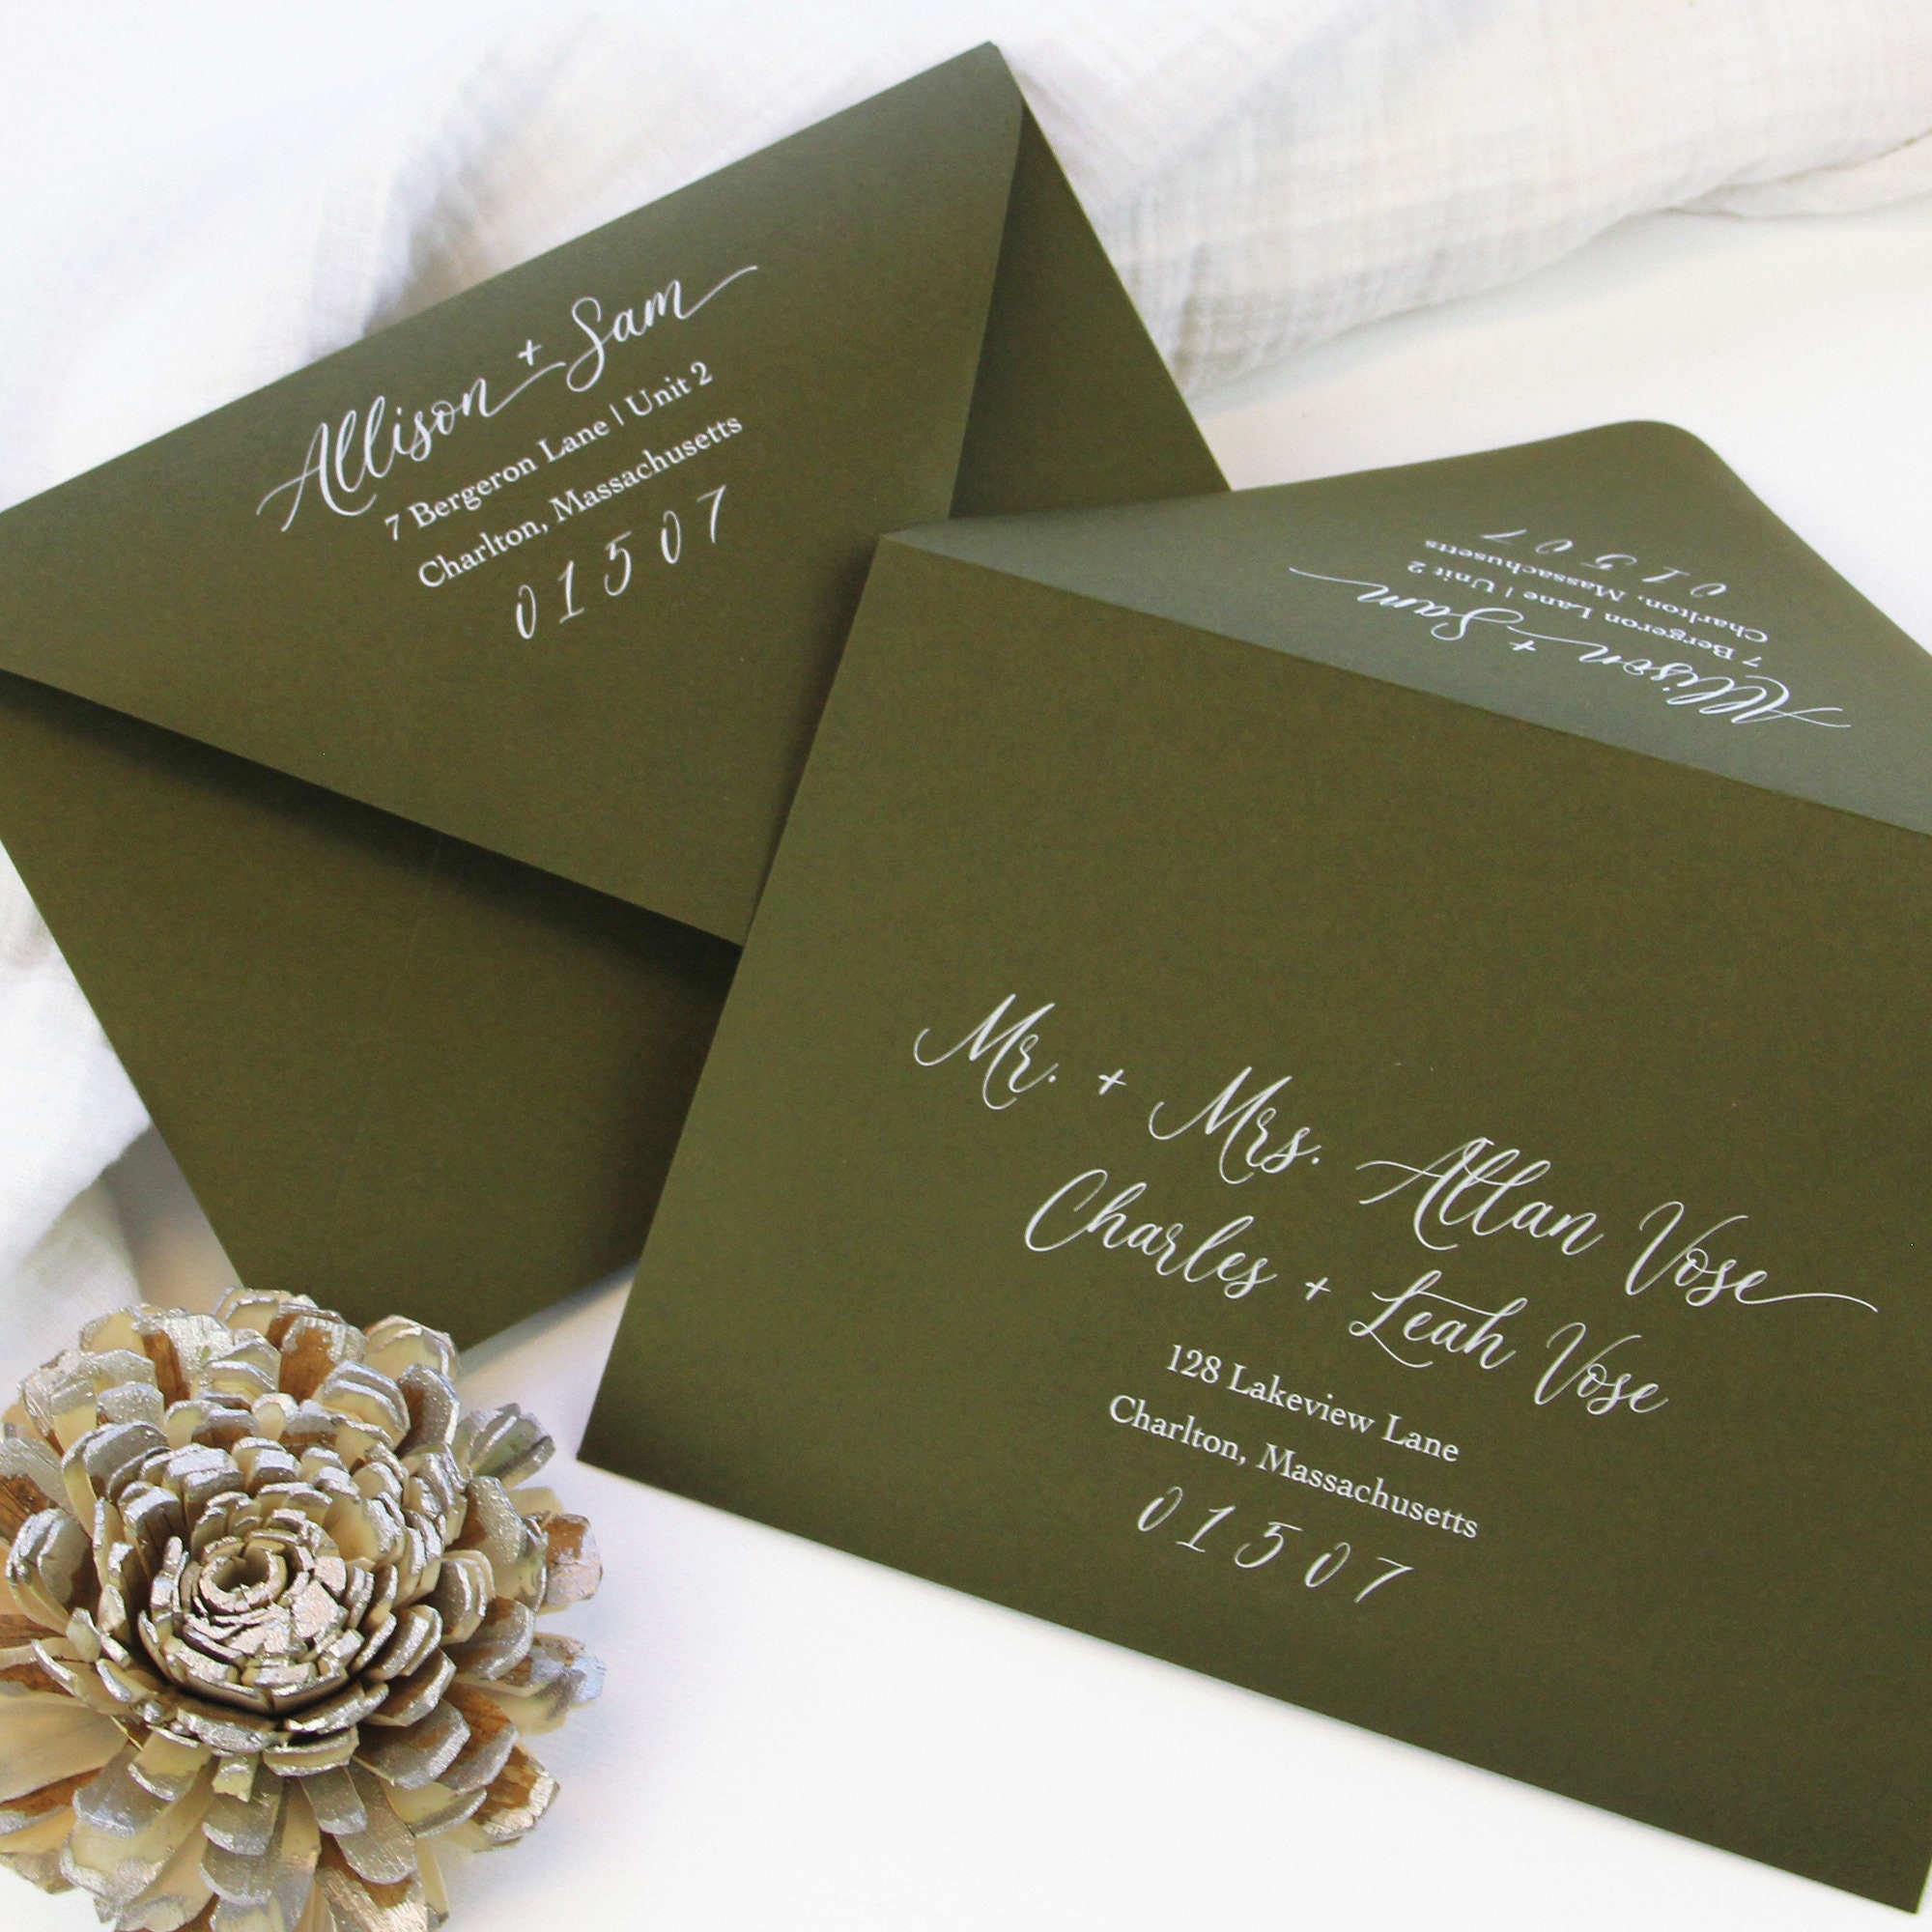 5x7 Metallic Gold Floral & Forest Green Wedding Invitation with Directions  Insert, Postcard RSVP and Envelope Liner. Different Color Options